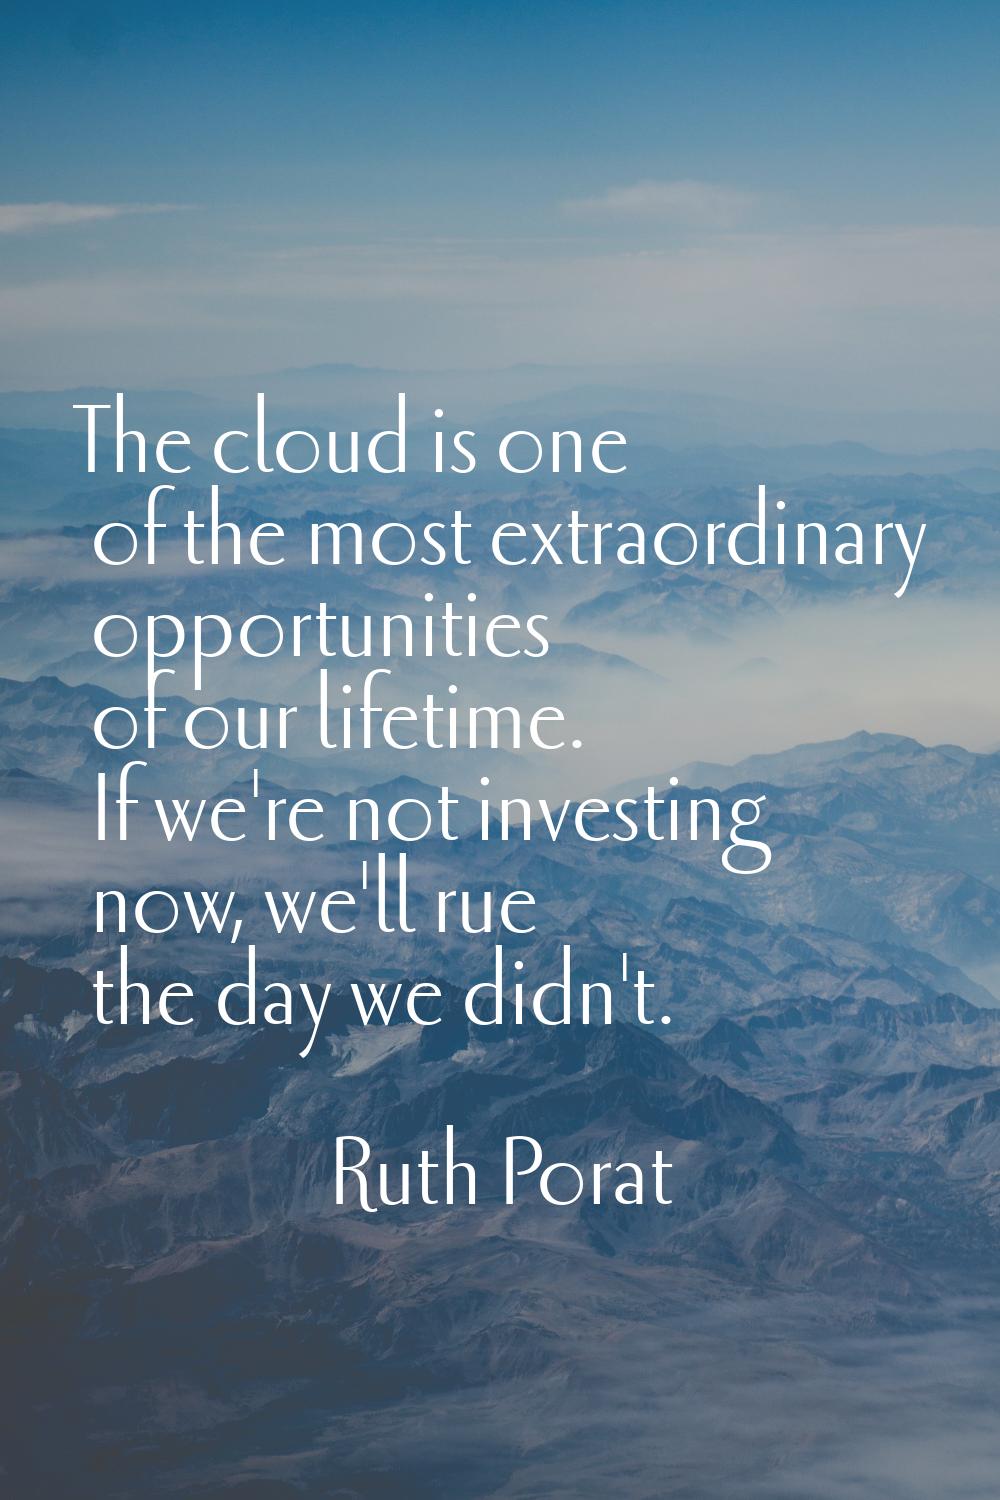 The cloud is one of the most extraordinary opportunities of our lifetime. If we're not investing no